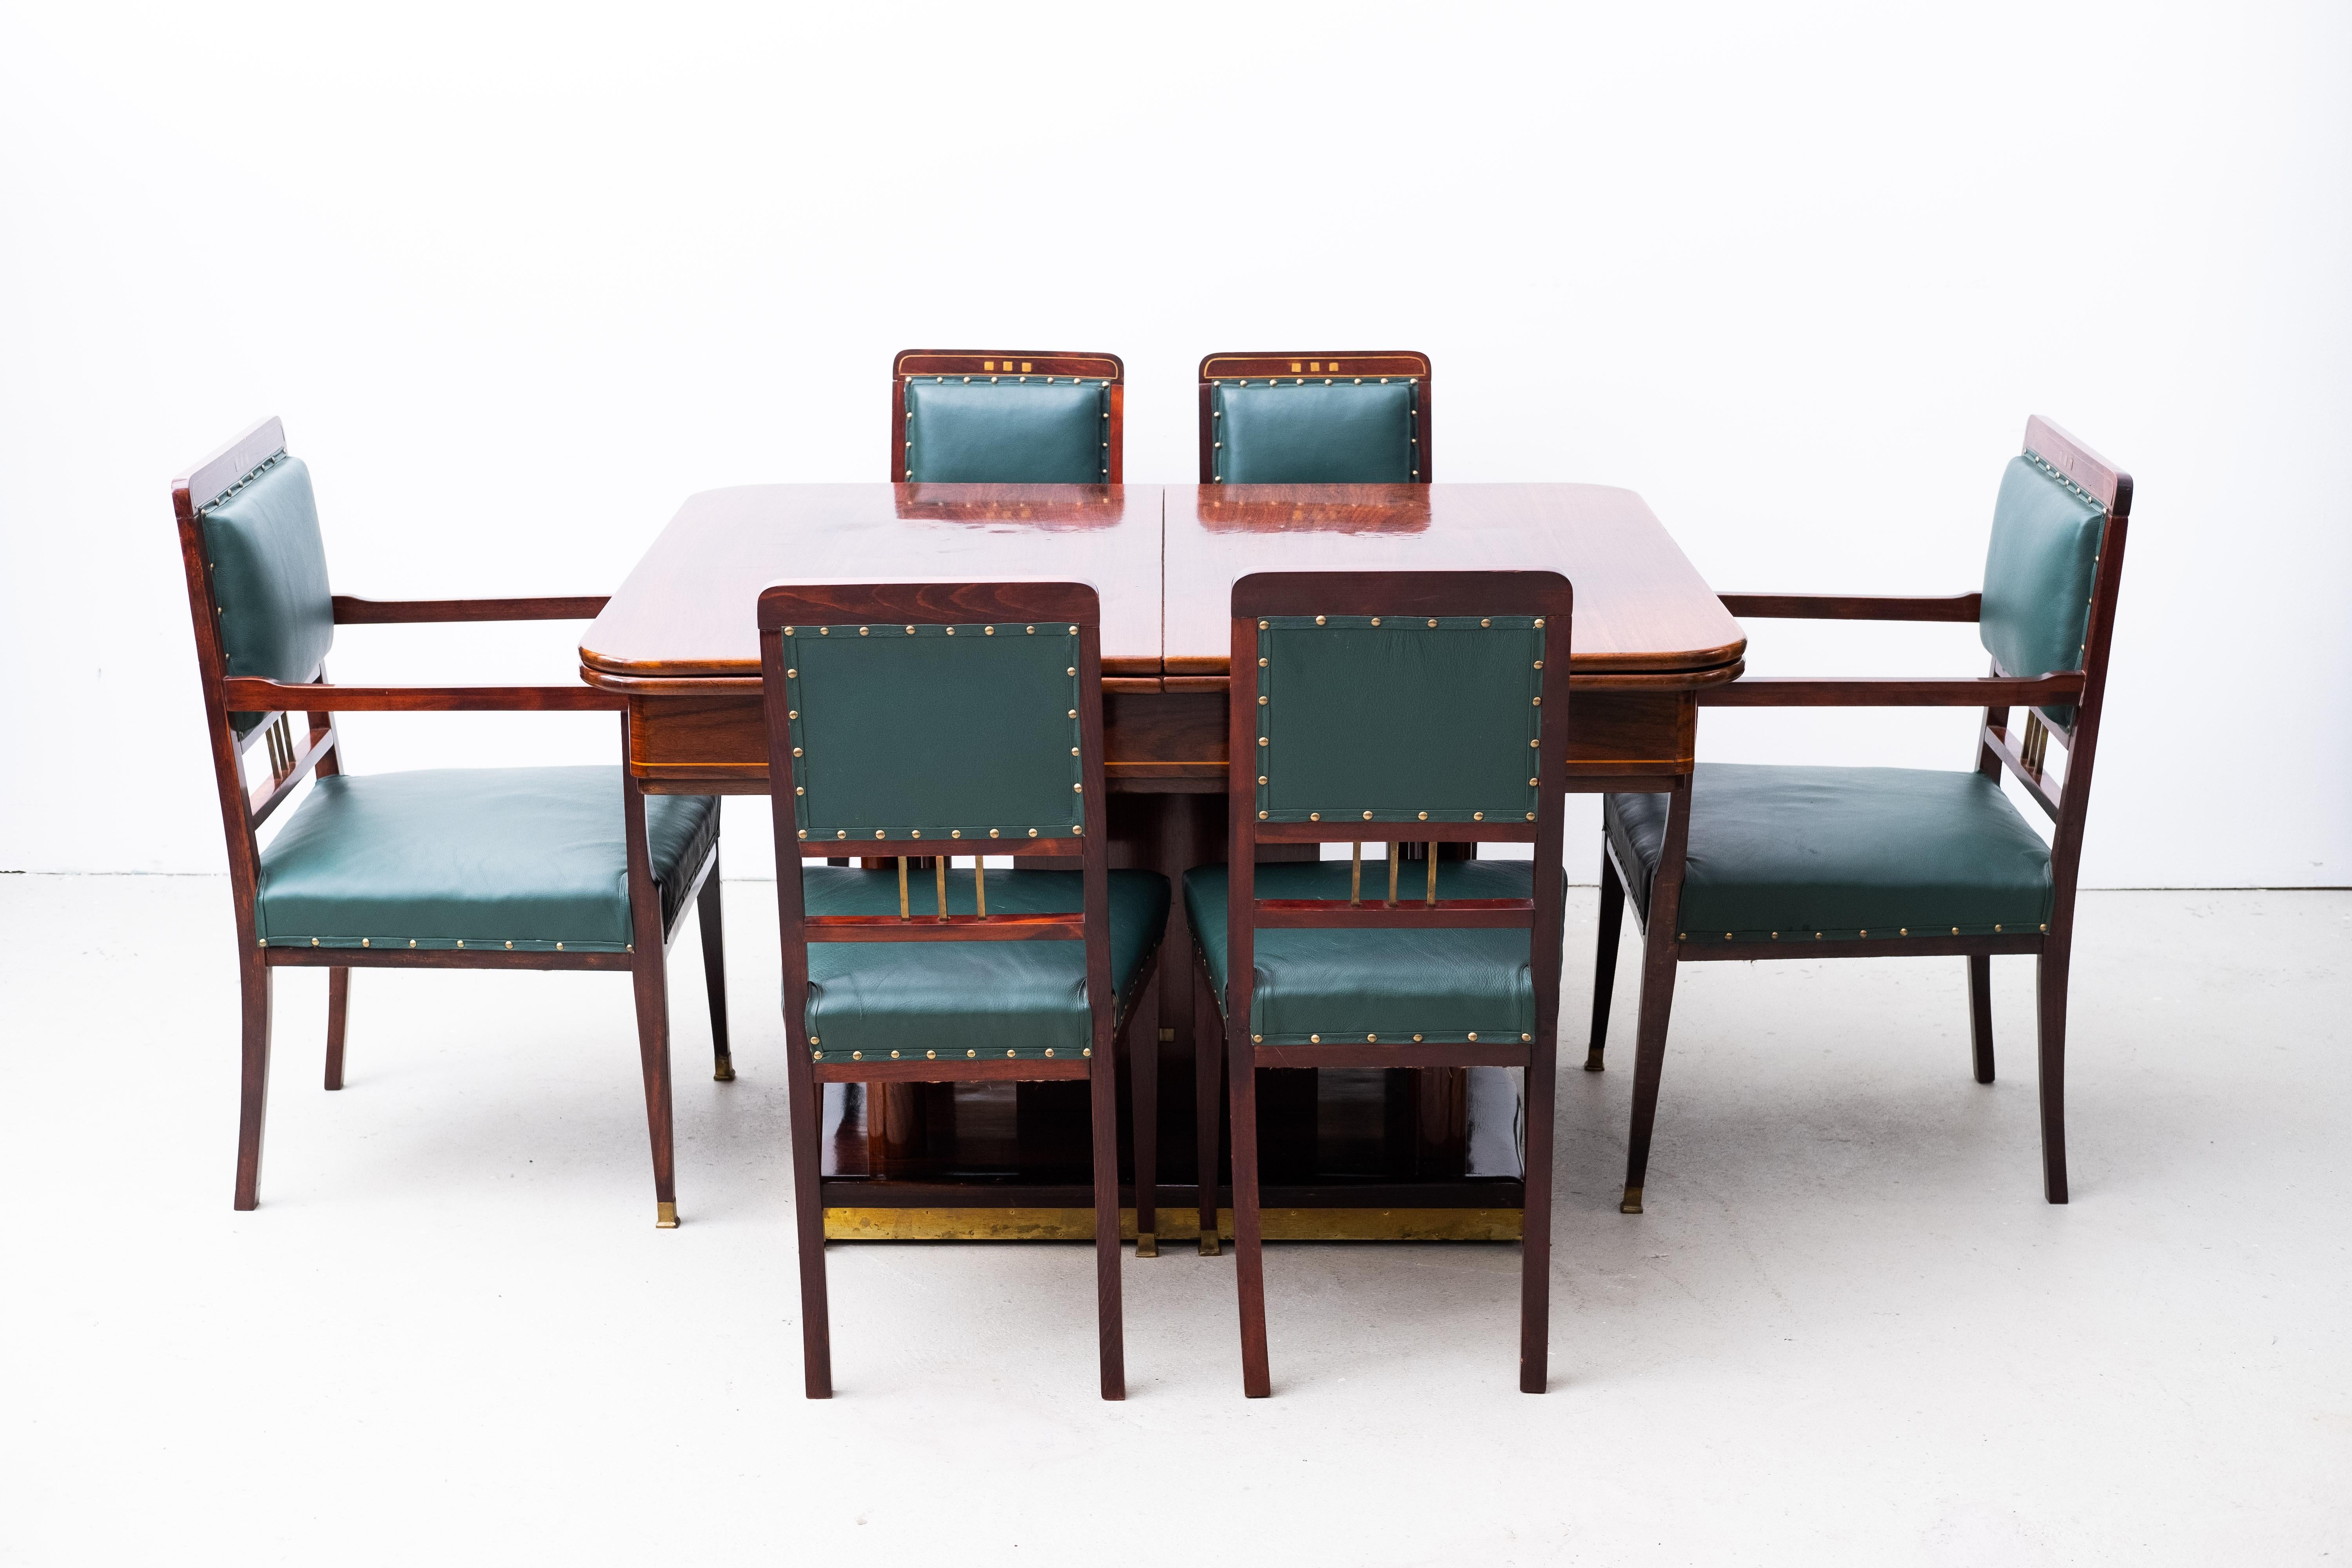 Art Nouveau Diningroom Set, Rosewood (Table, 4 Chairs, 2 Armstools), Vienna 1910 For Sale 2